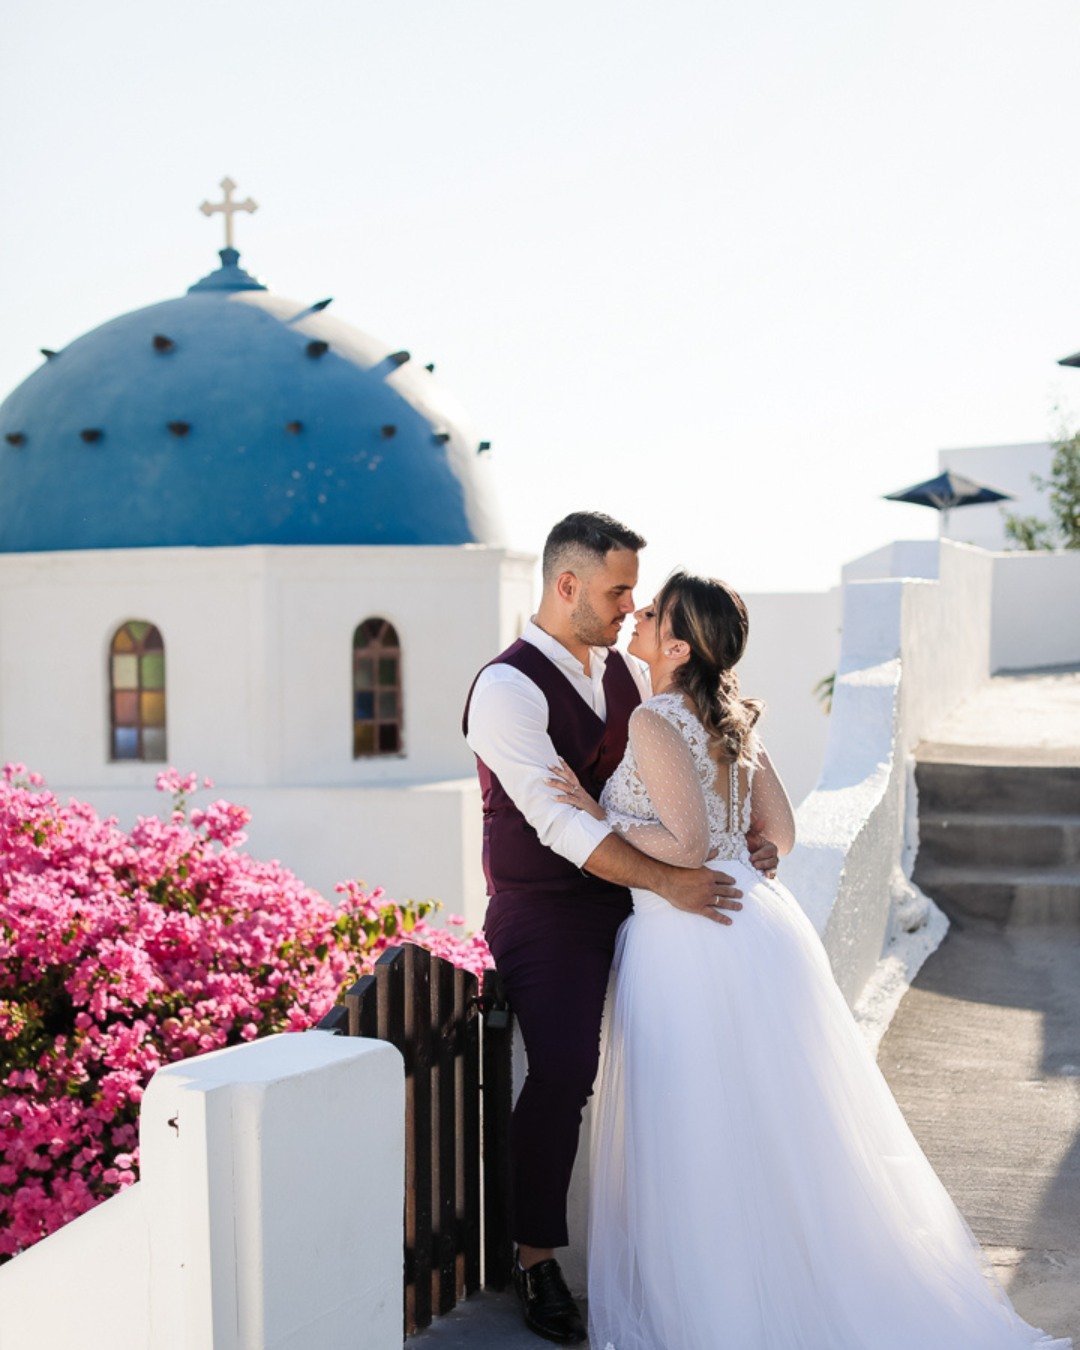 Begin a timeless romantic journey as we meticulously craft the finest details for your exquisite destination wedding in Greece.

Planning &amp; decoration @pennyzachouevents 
Photographer @kapetanakis_santorini

#PennyZachou #PennyZachouEvents #Desti